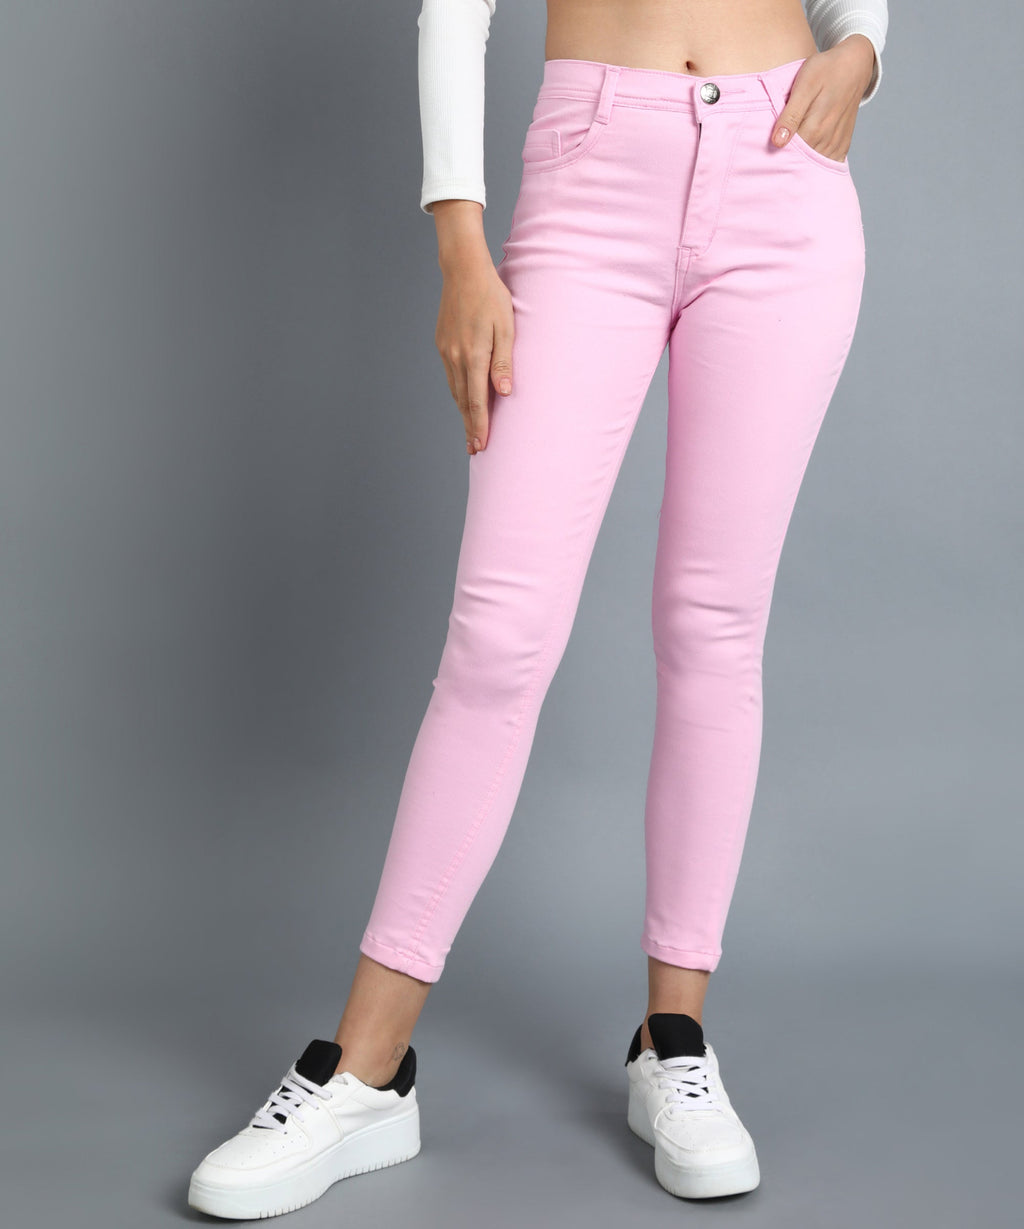 Pink slim fit 5- pocket high rise jeans, clean look, zip fly with button closure, waistband with belt loops